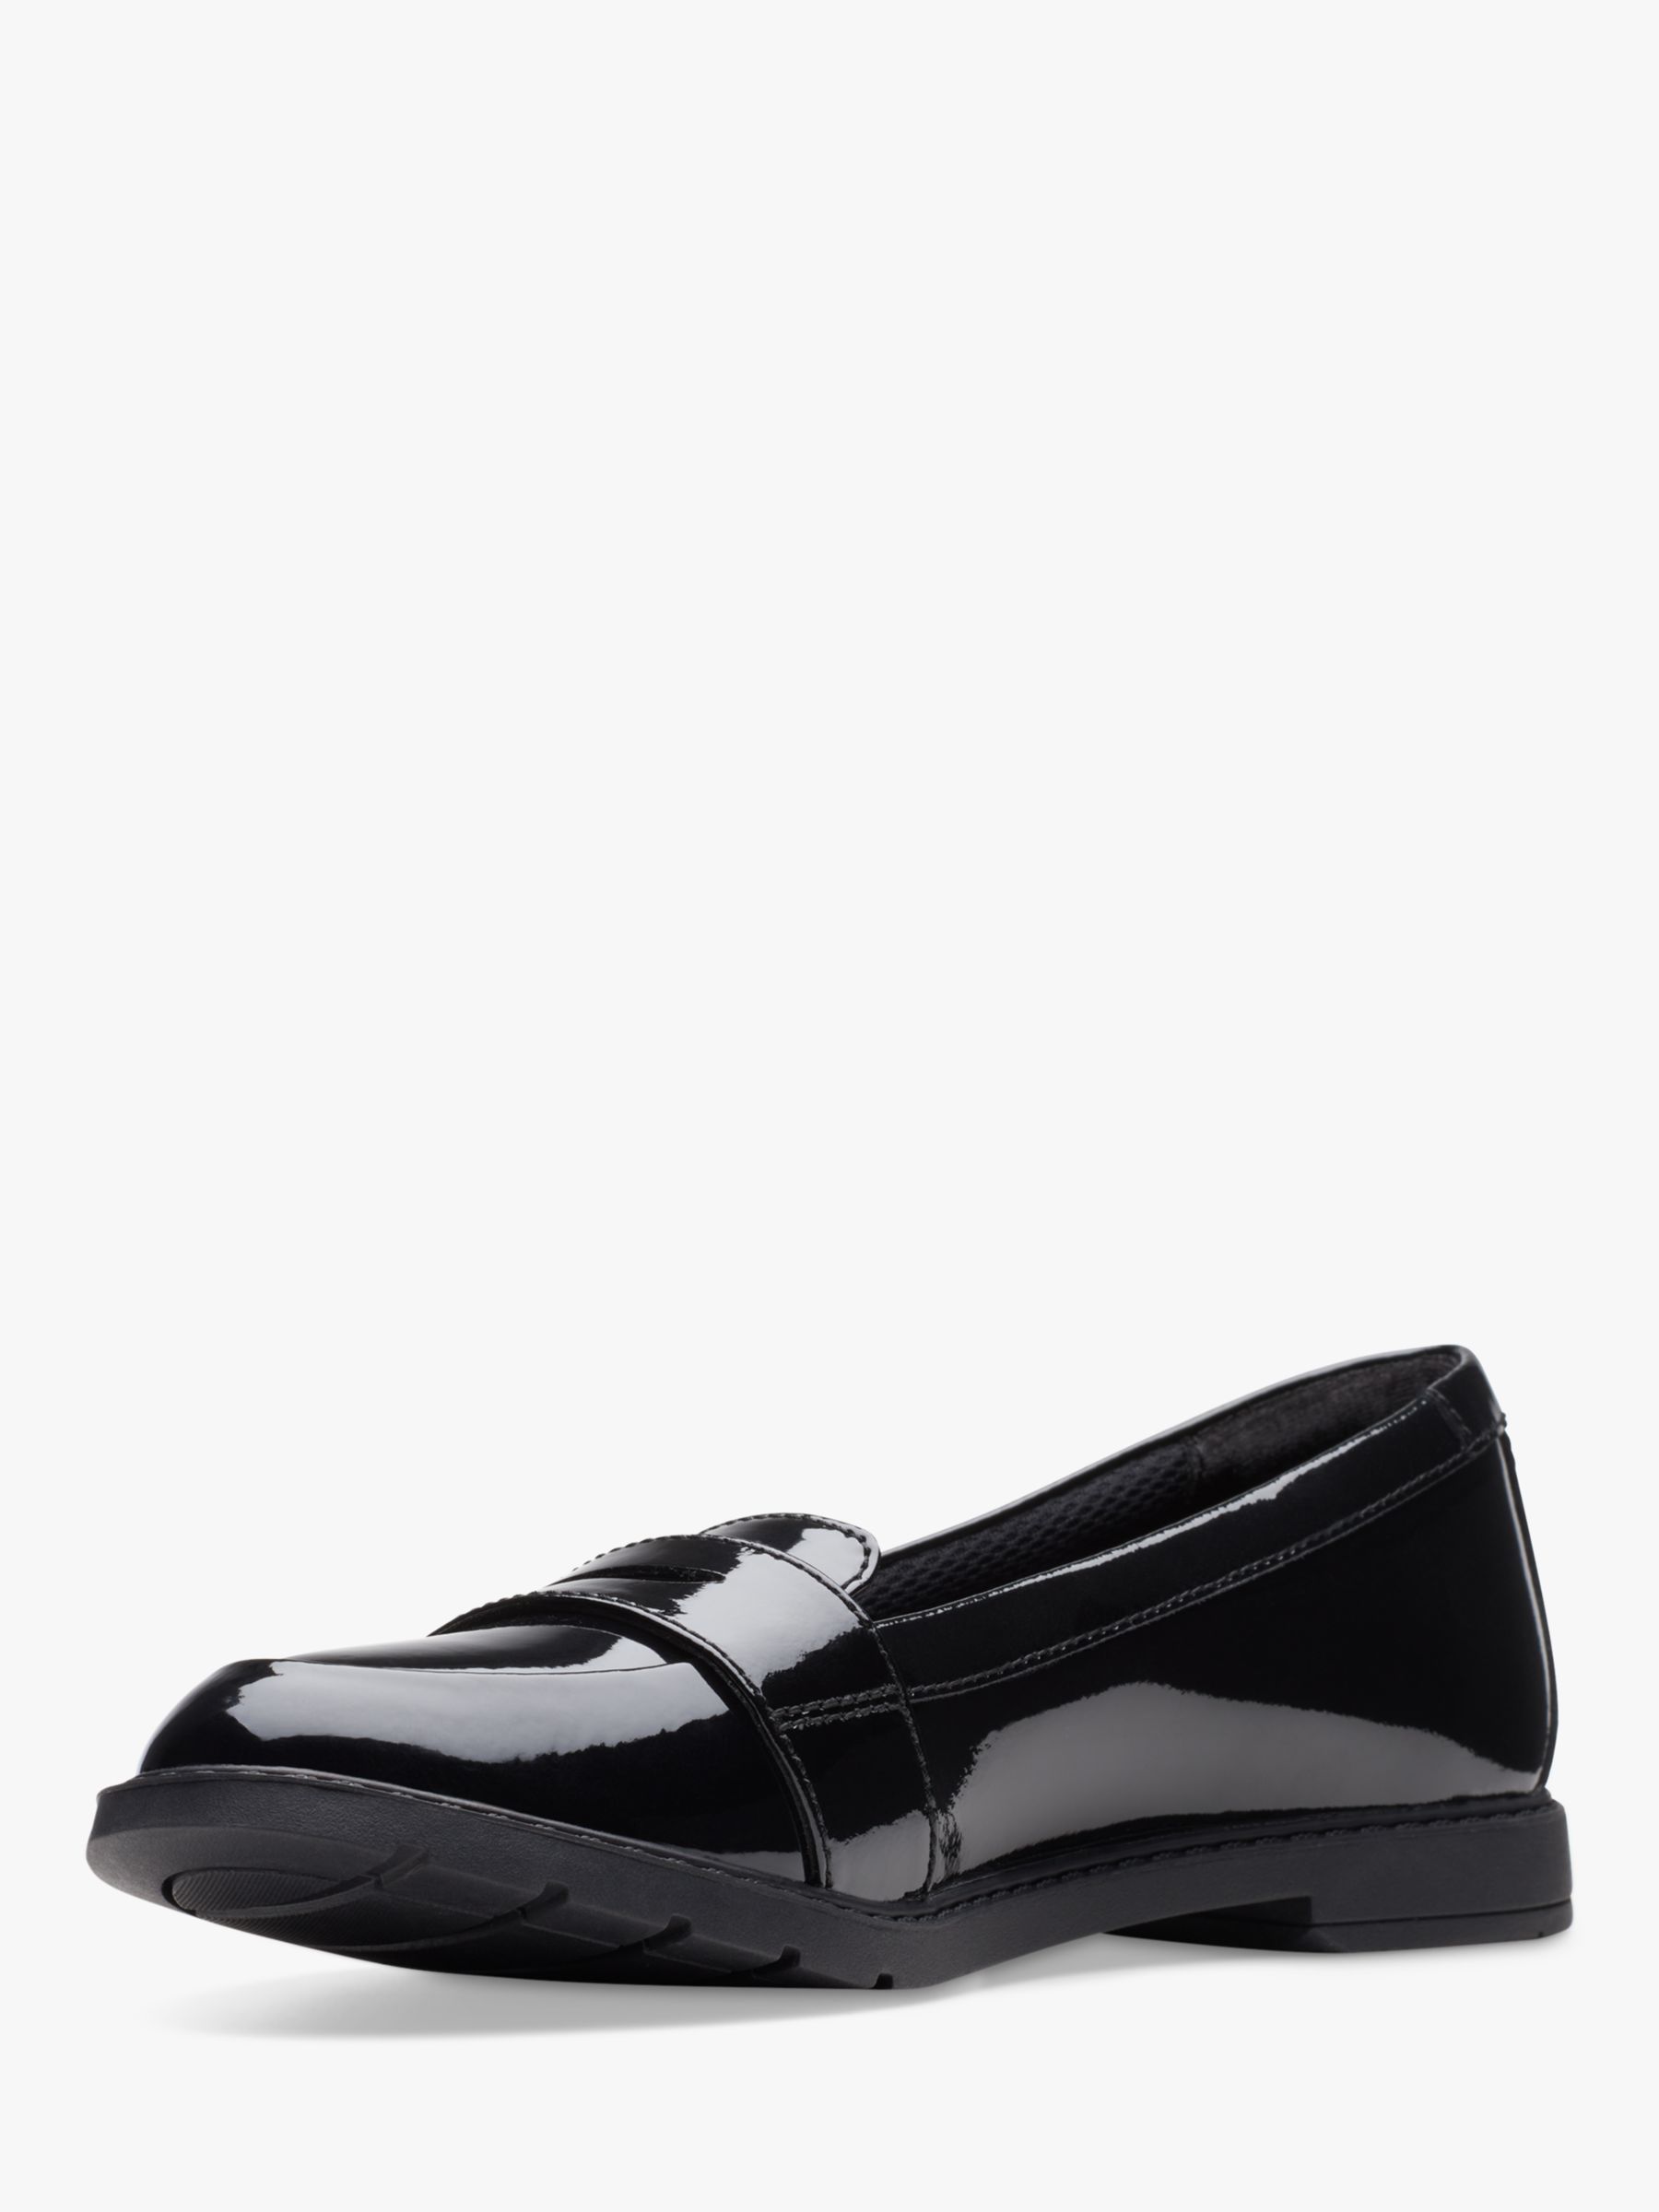 Clarks Kids' Scala Loafer School Shoes at John Lewis & Partners